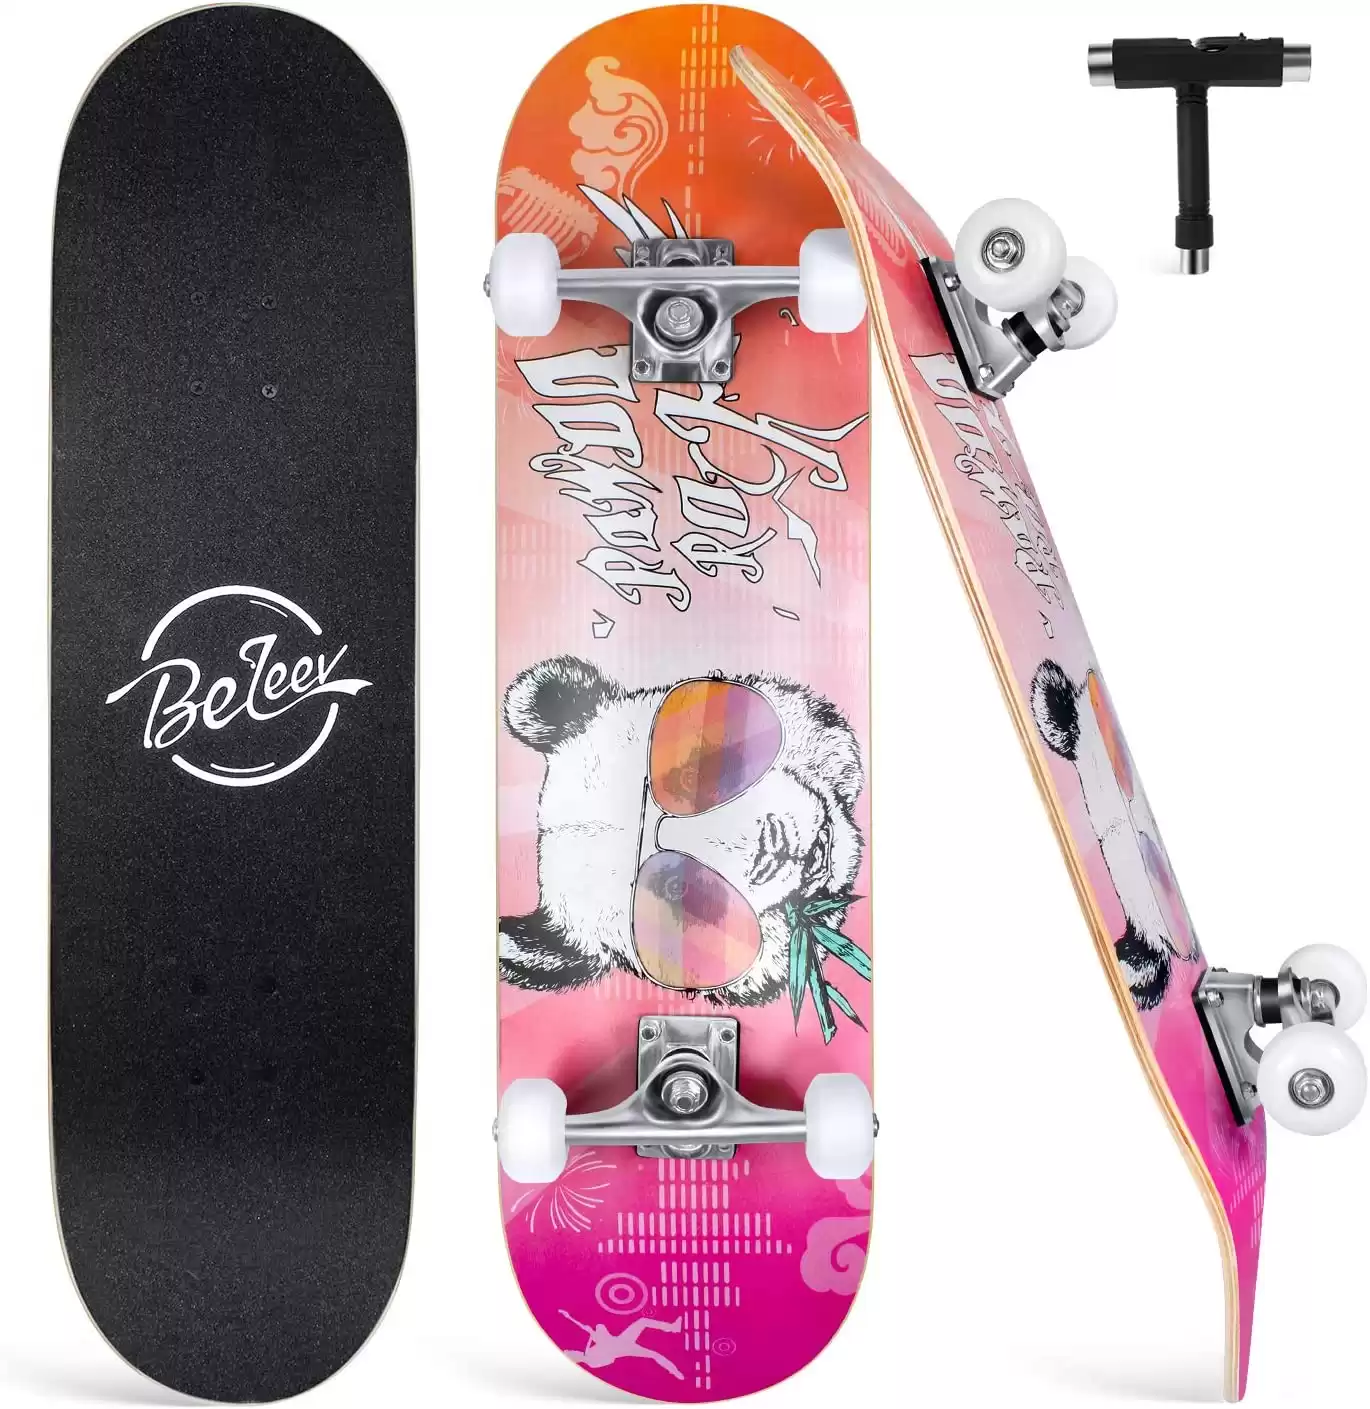 Beleev Skateboards for Beginners - 31 Inch, 7 Layer Canadian Maple, Double Kick Deck, Concave Cruiser Trick Skateboard